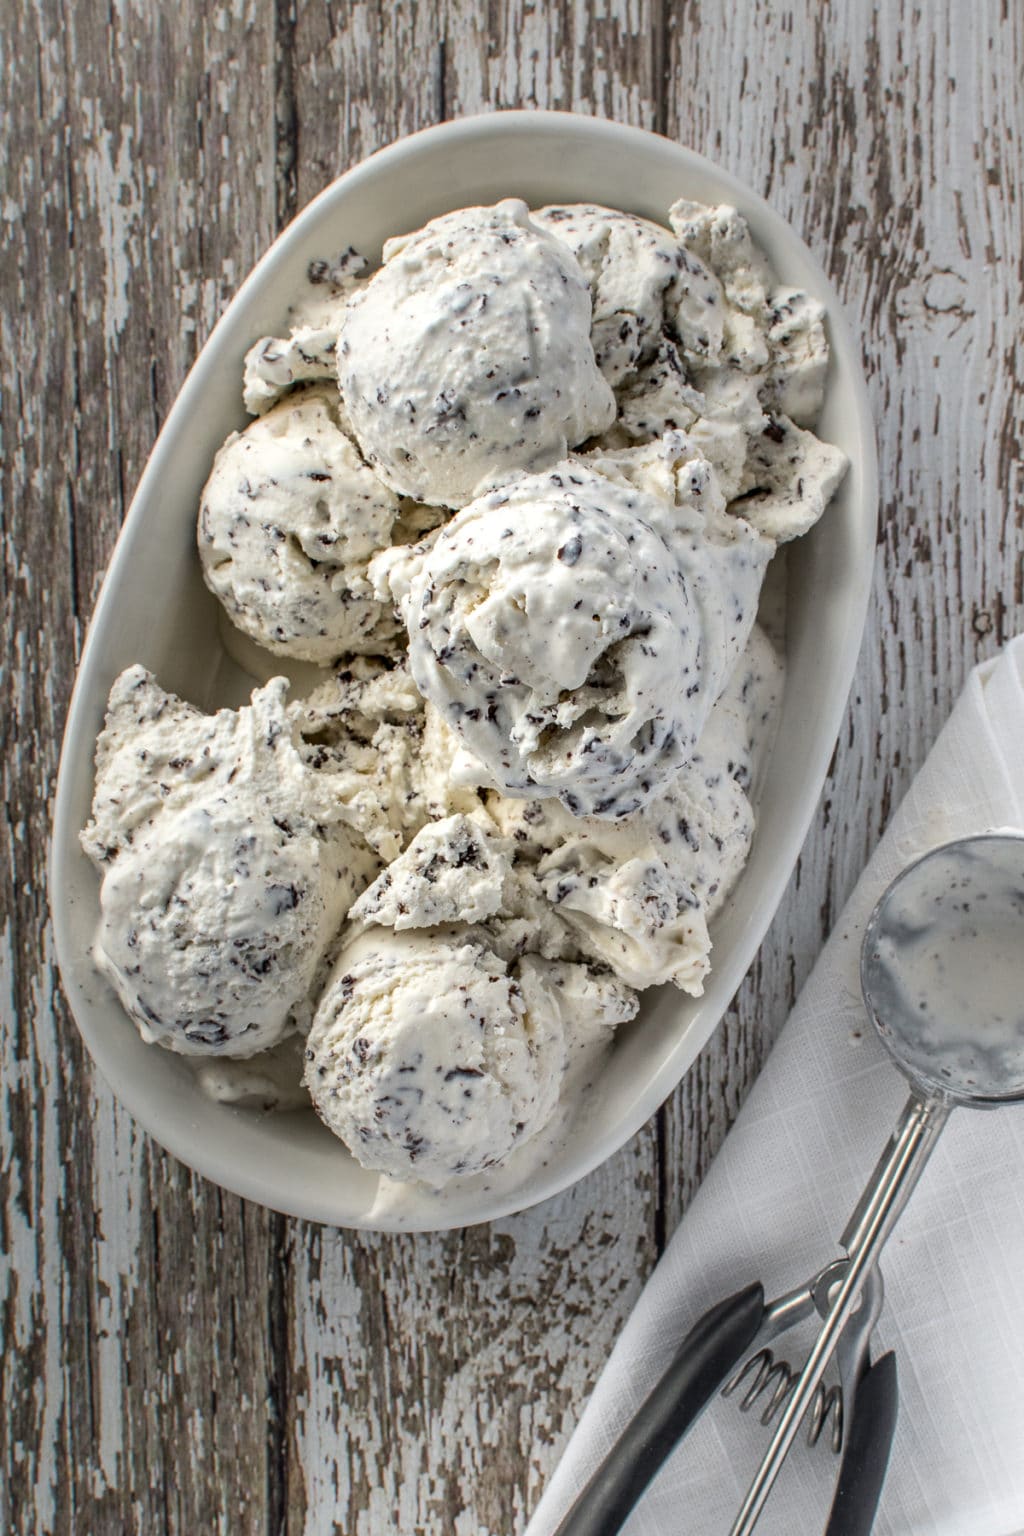 Oval, white bowl piled high with vanilla, ice cream full of shaved chocolate. On a rustic barn board back drop with a folded napkin at the side on which rests an empty ice cream scoop.